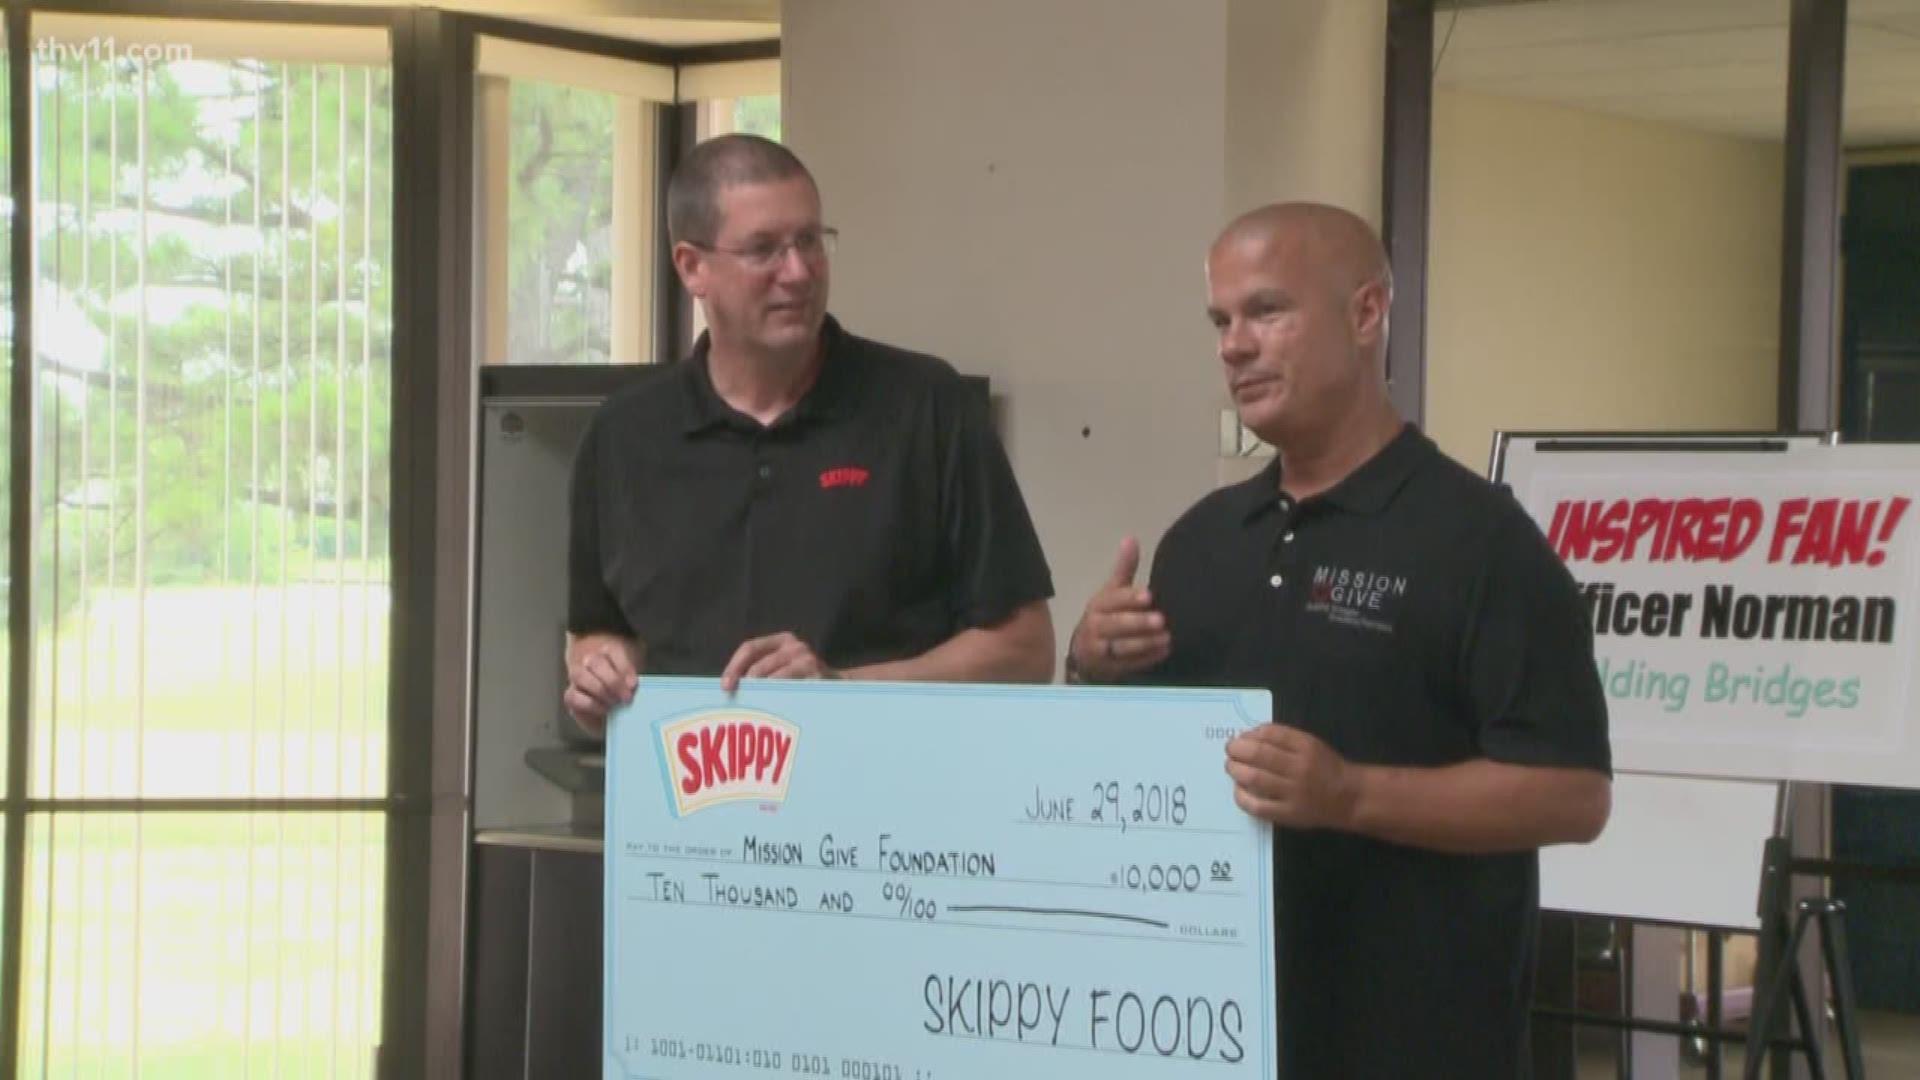 He thought he was just touring the place that makes his favorite foods, but they surprised him with a check for his foundation.